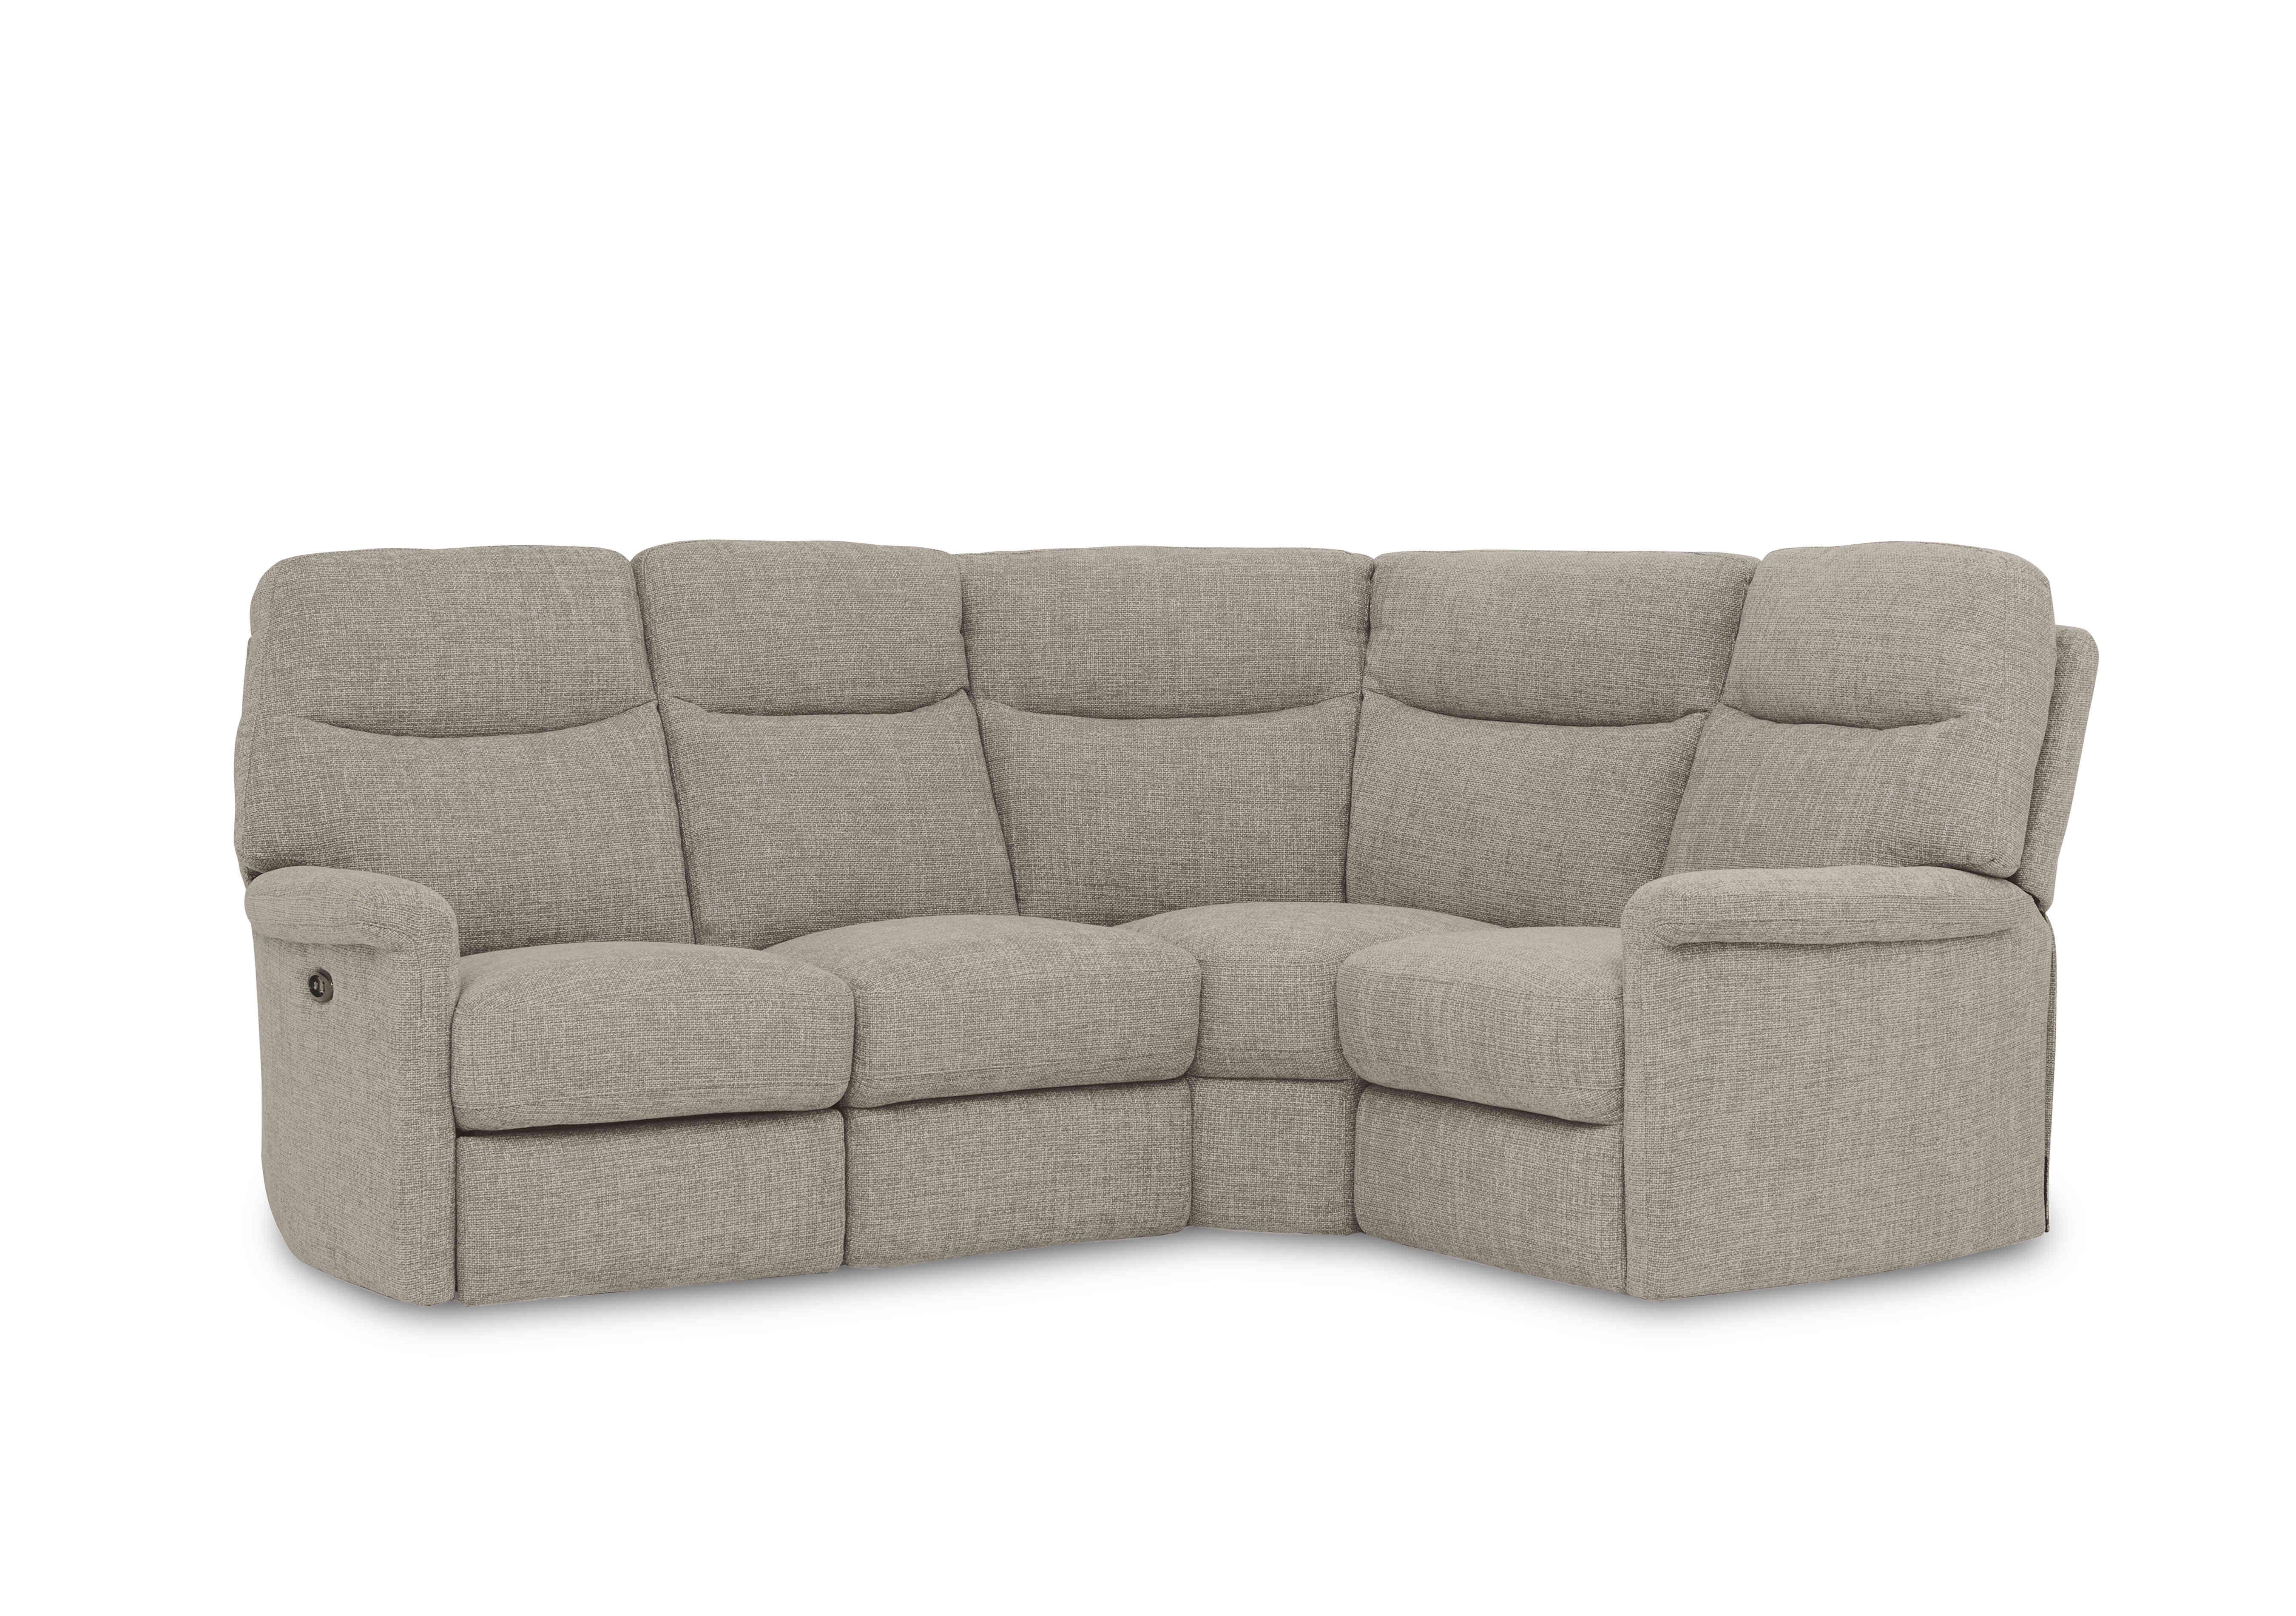 Compact Collection Lille Fabric Corner Sofa in Fab-Cac-R120 Sand on Furniture Village